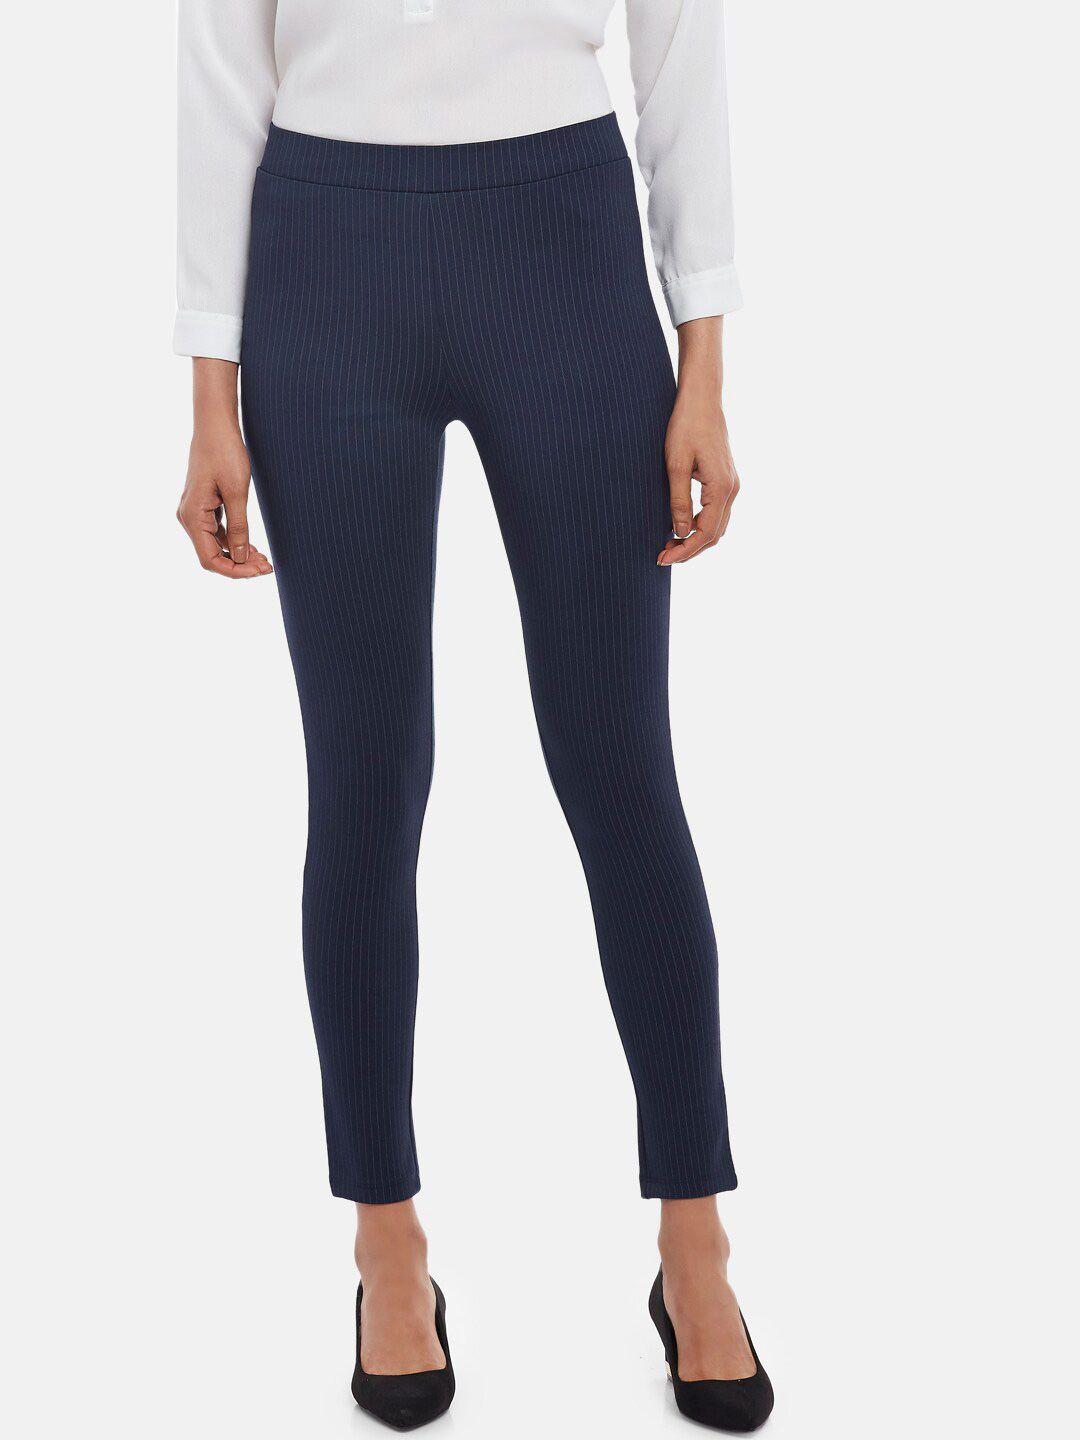 annabelle-by-pantaloons-women-navy-blue-striped-treggings